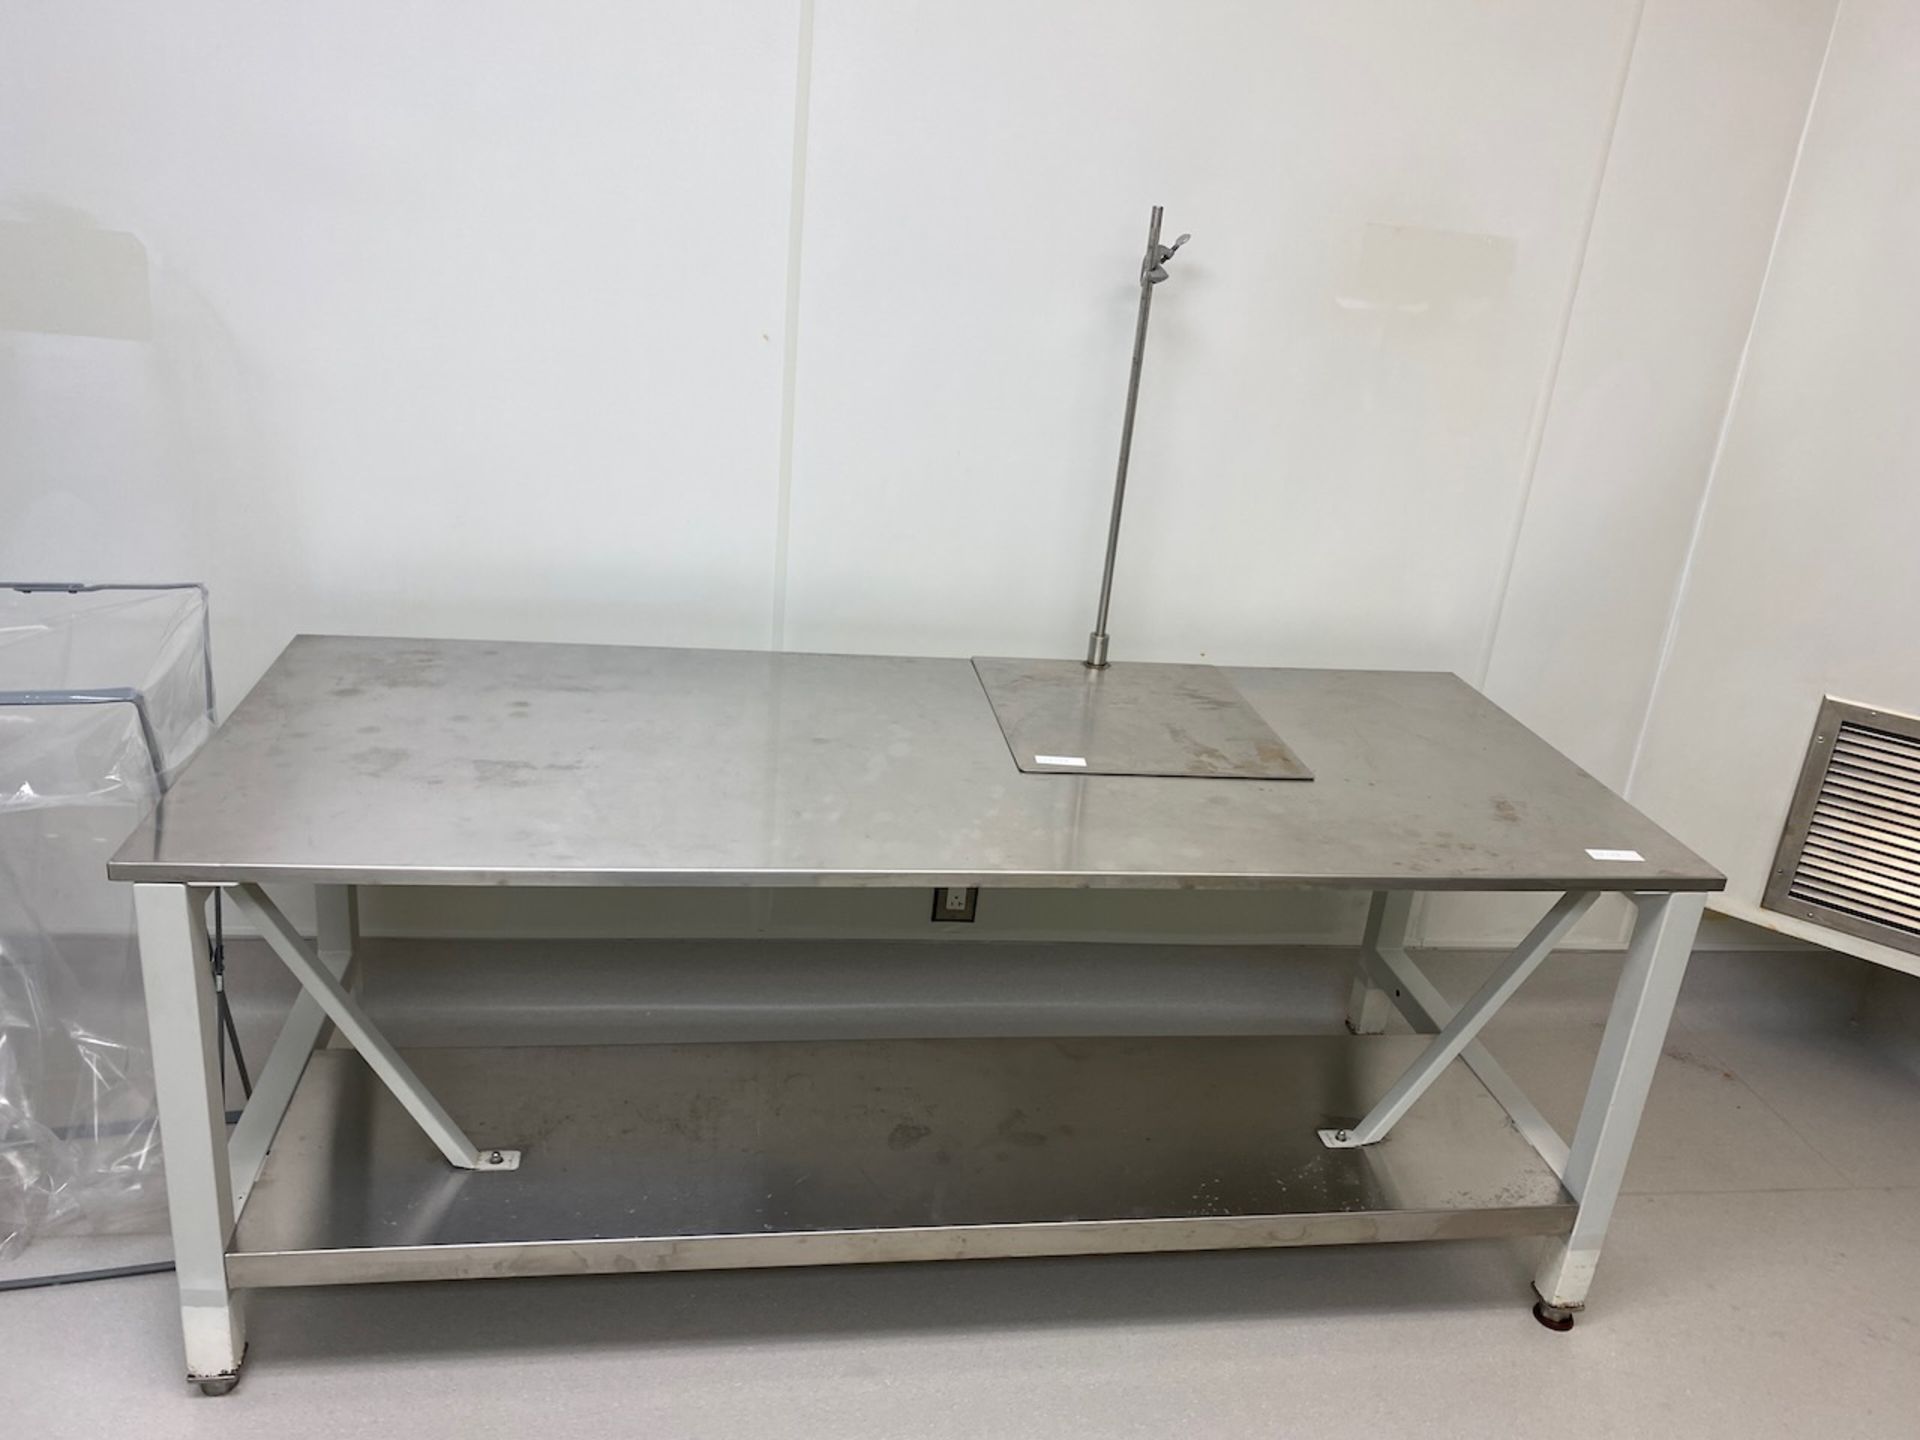 Lot of two stainless steel tables - Image 3 of 4